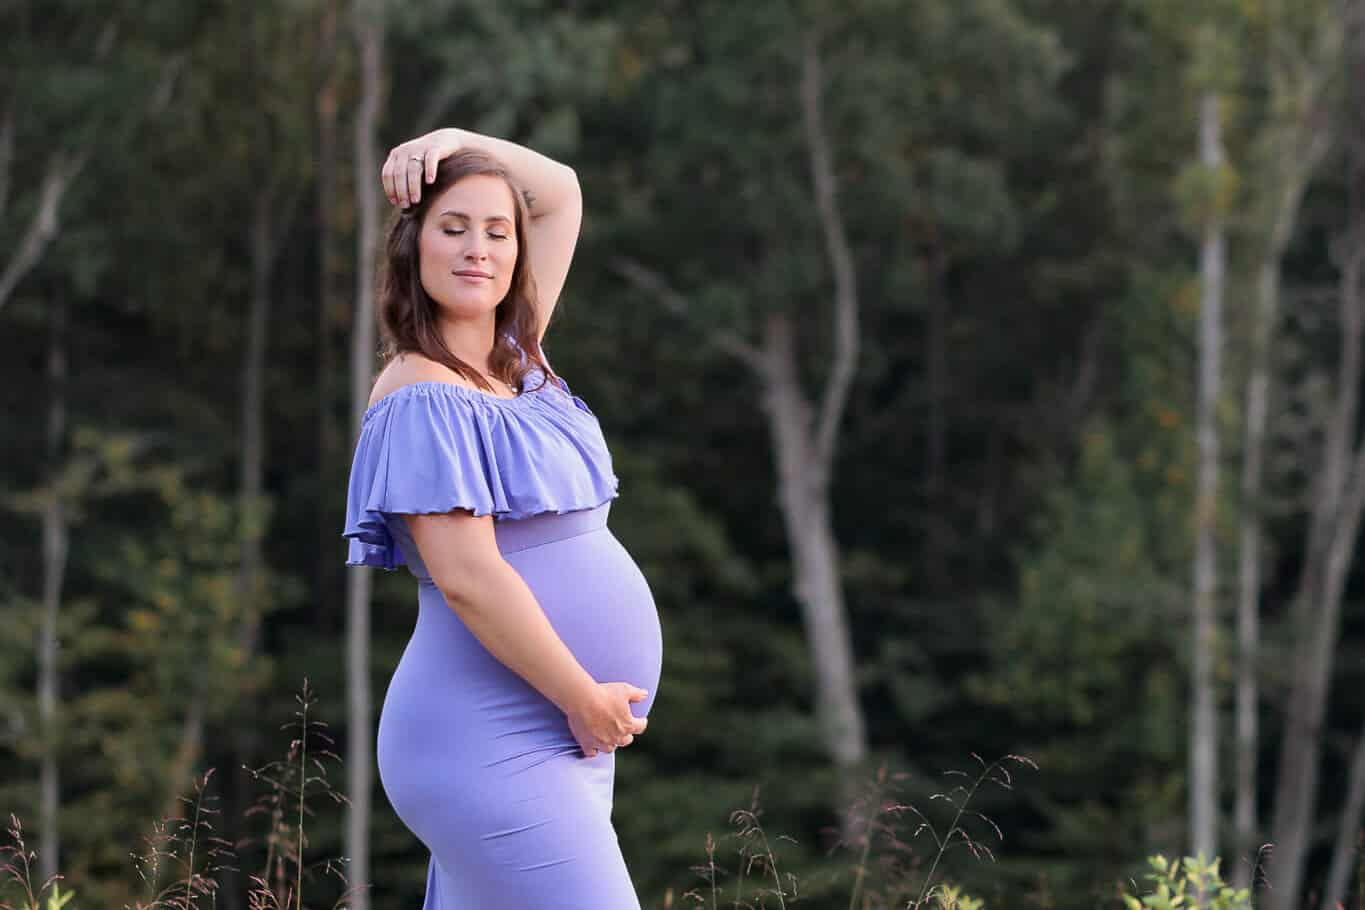 A blog about prenatal yoga Northern Virginia featuring a beautiful mother-to-be posing in the woods.